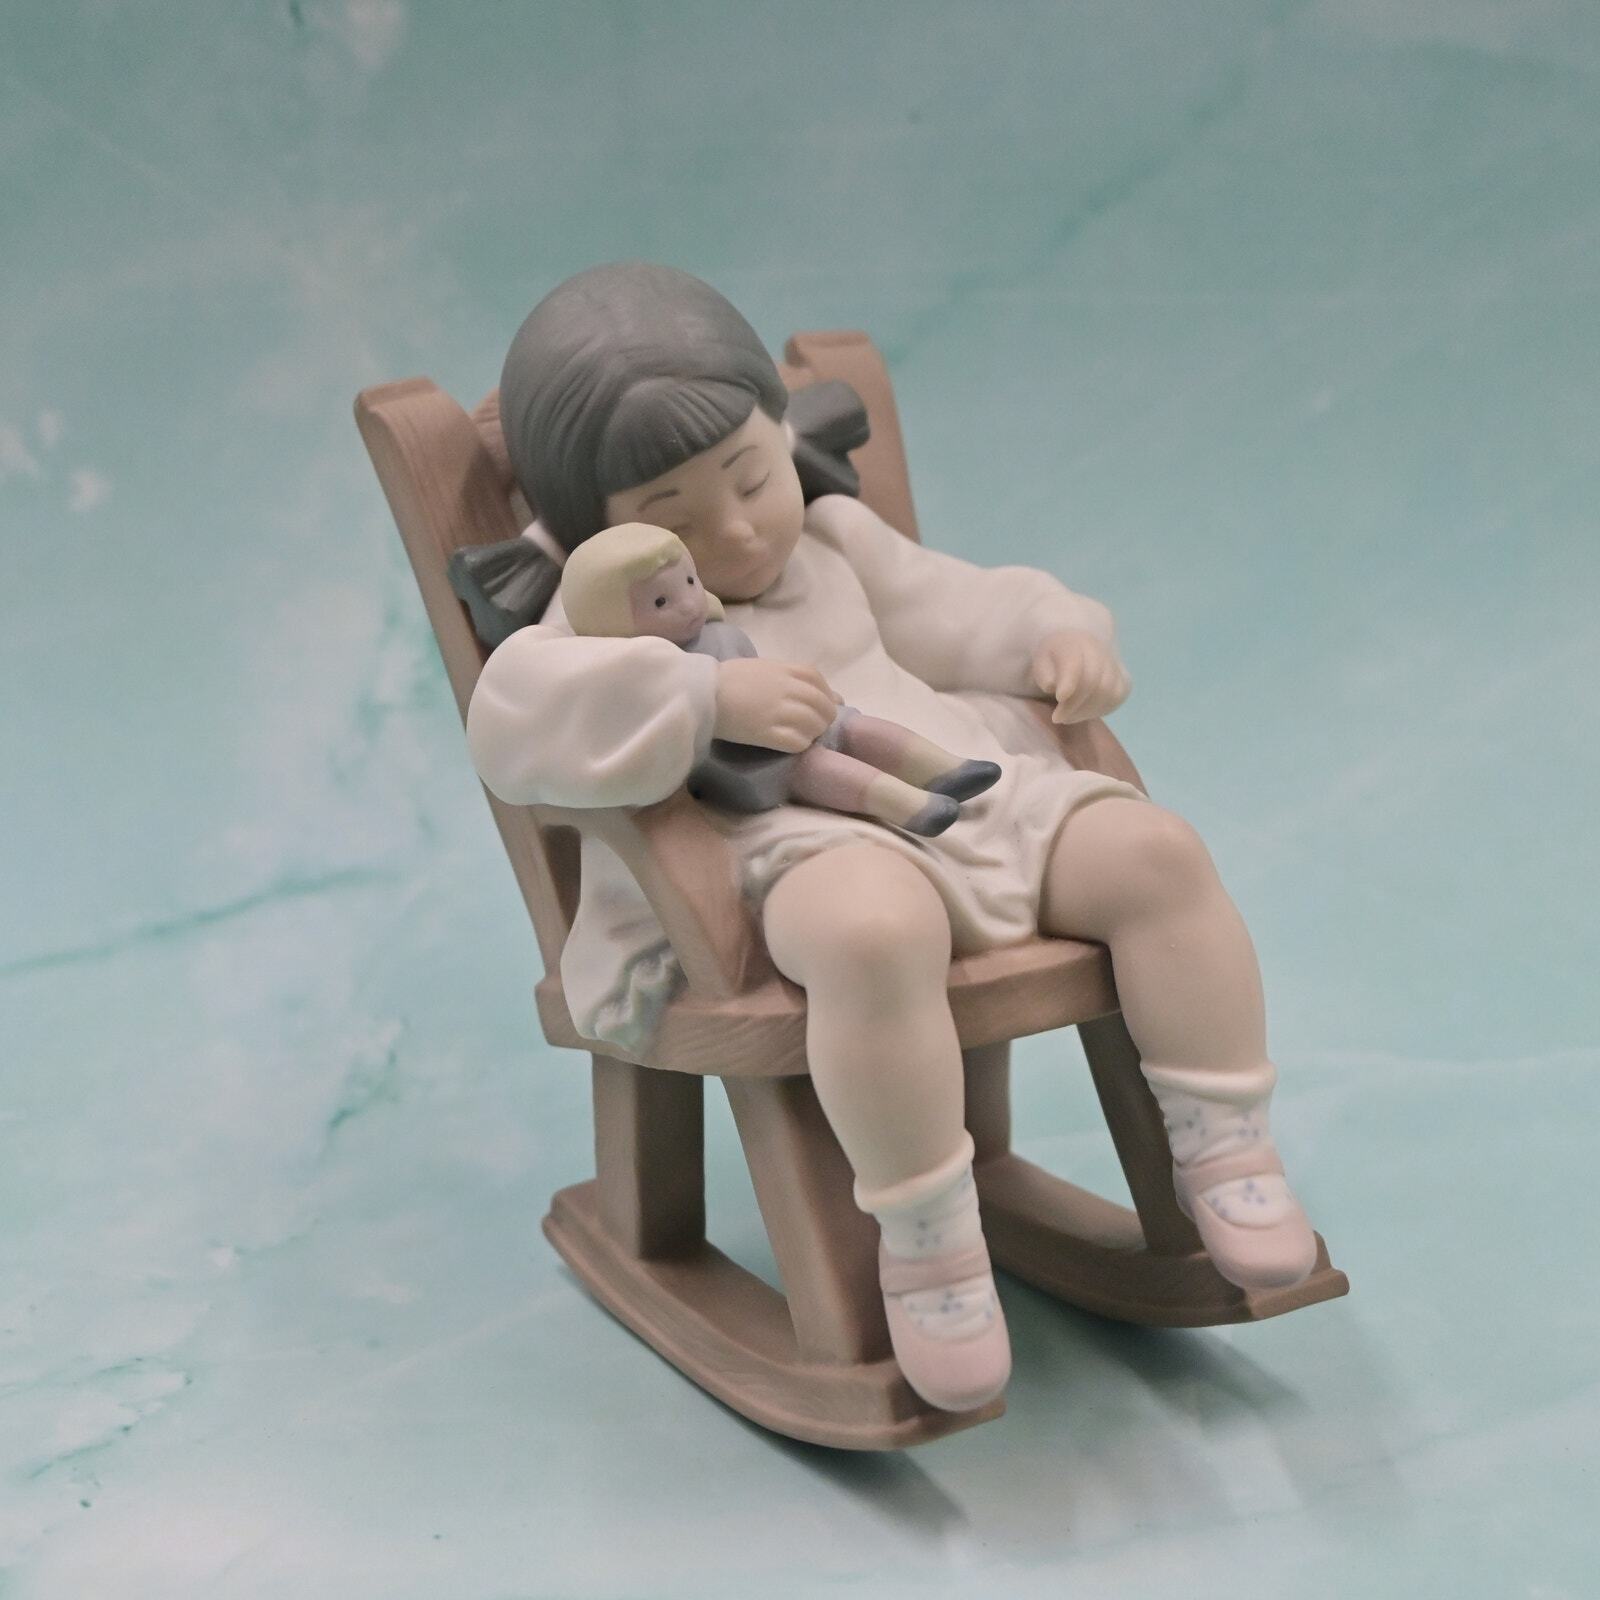 Vintage Lladro Naptime Girl Sleeping In Rocking Chair #5448 With Box